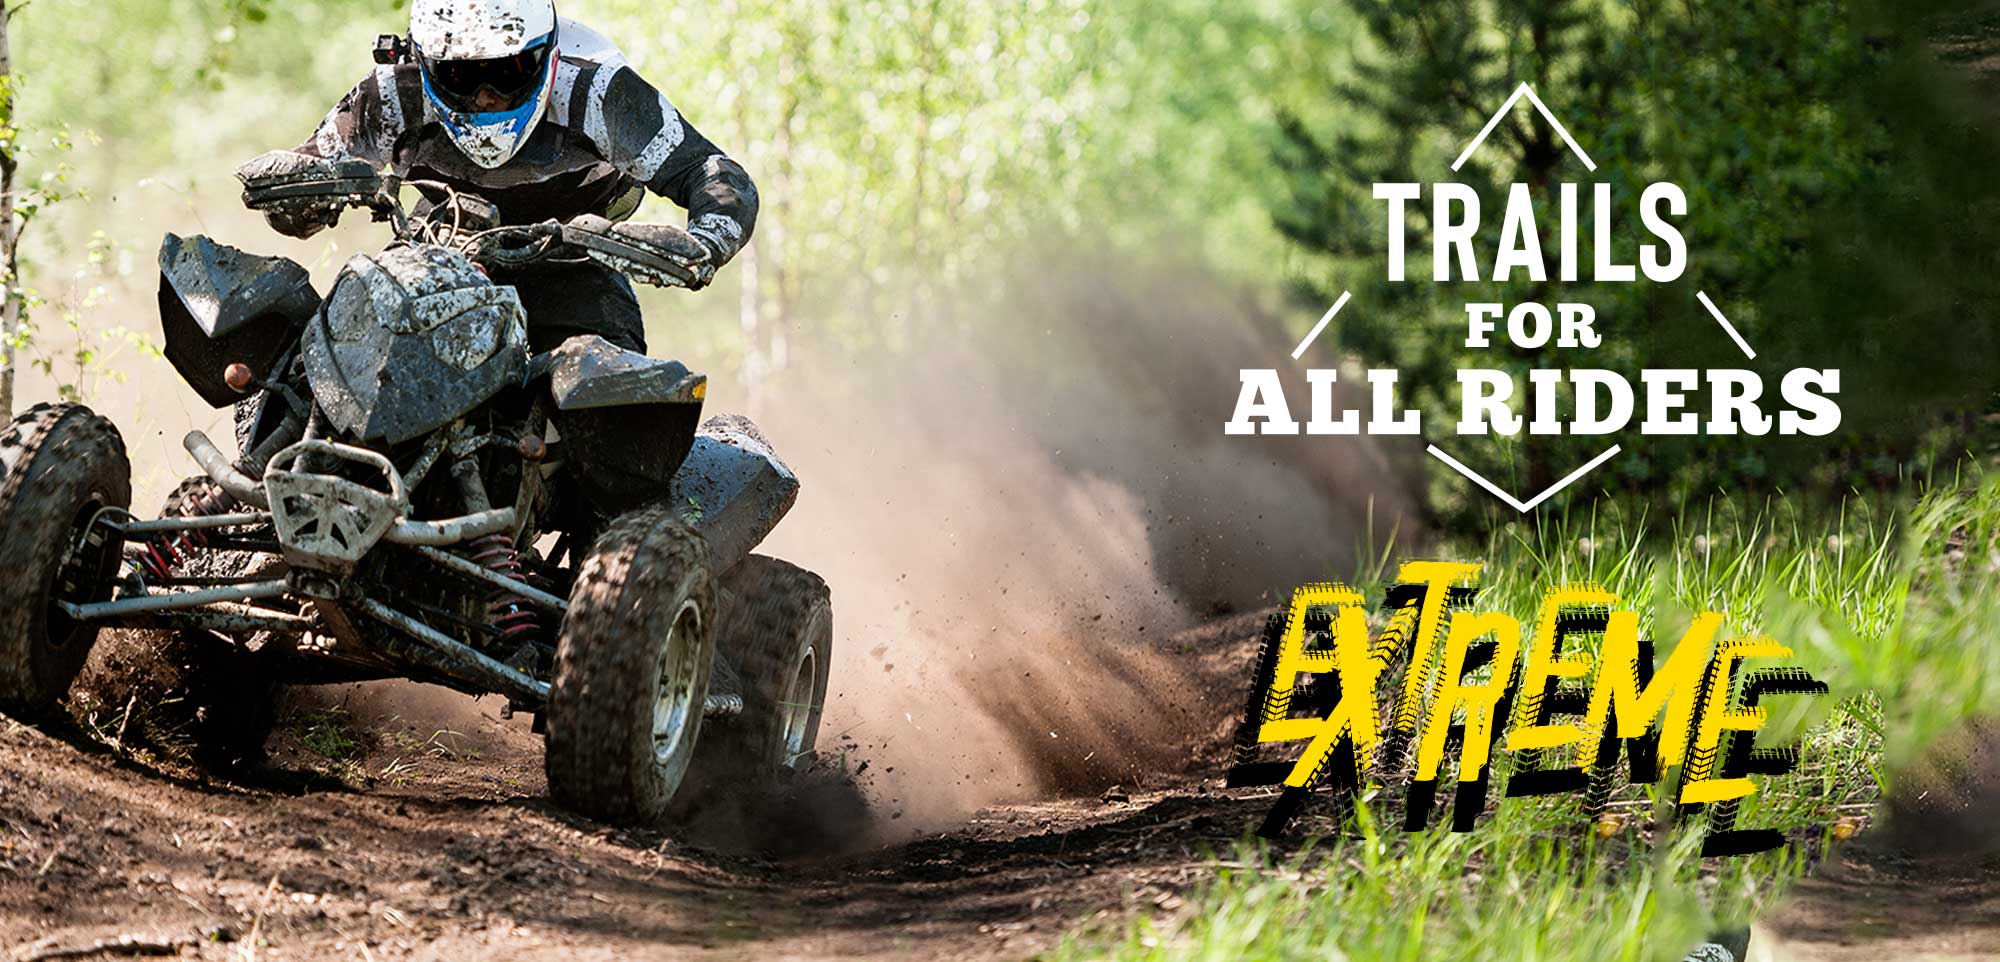 Trails for all riders